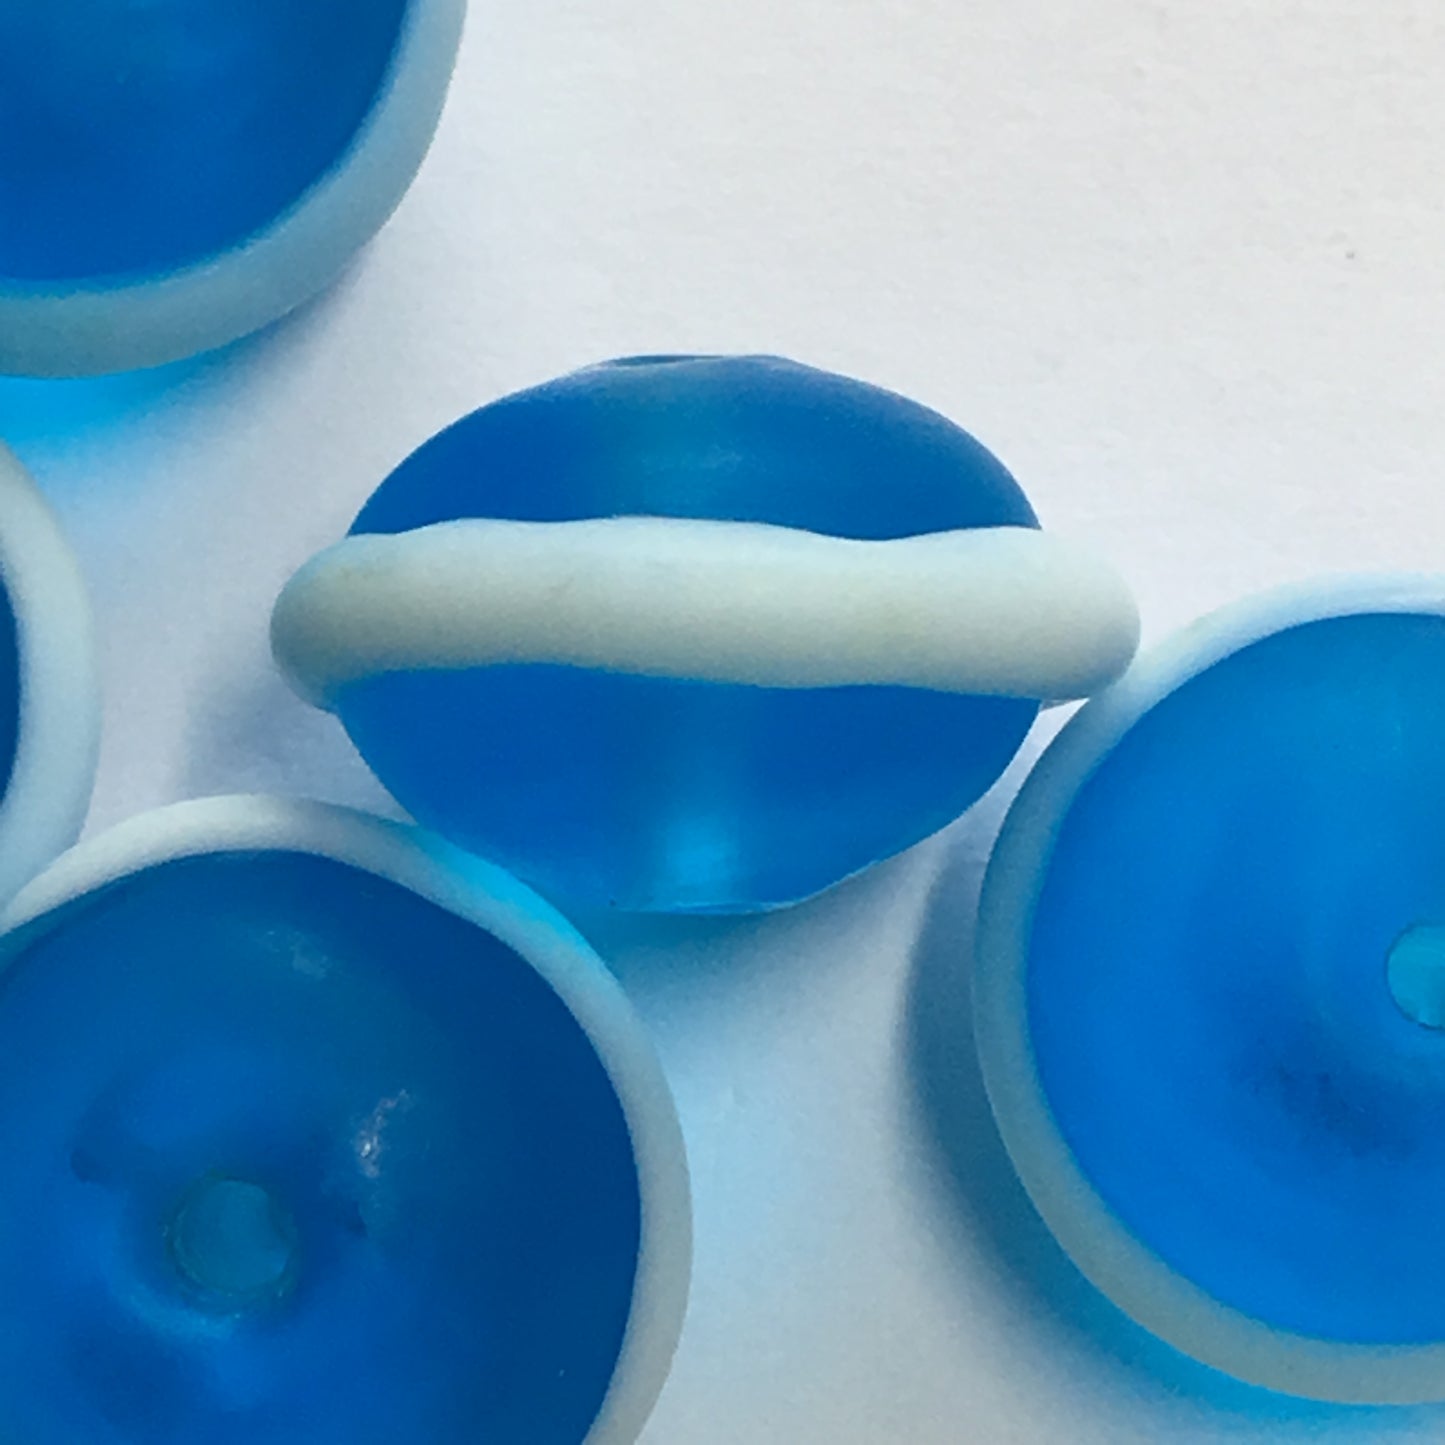 Blue Frosted Glass Lampwork Saucer Beads with White Swirl Band, 16 x 11 mm -  5 Beads